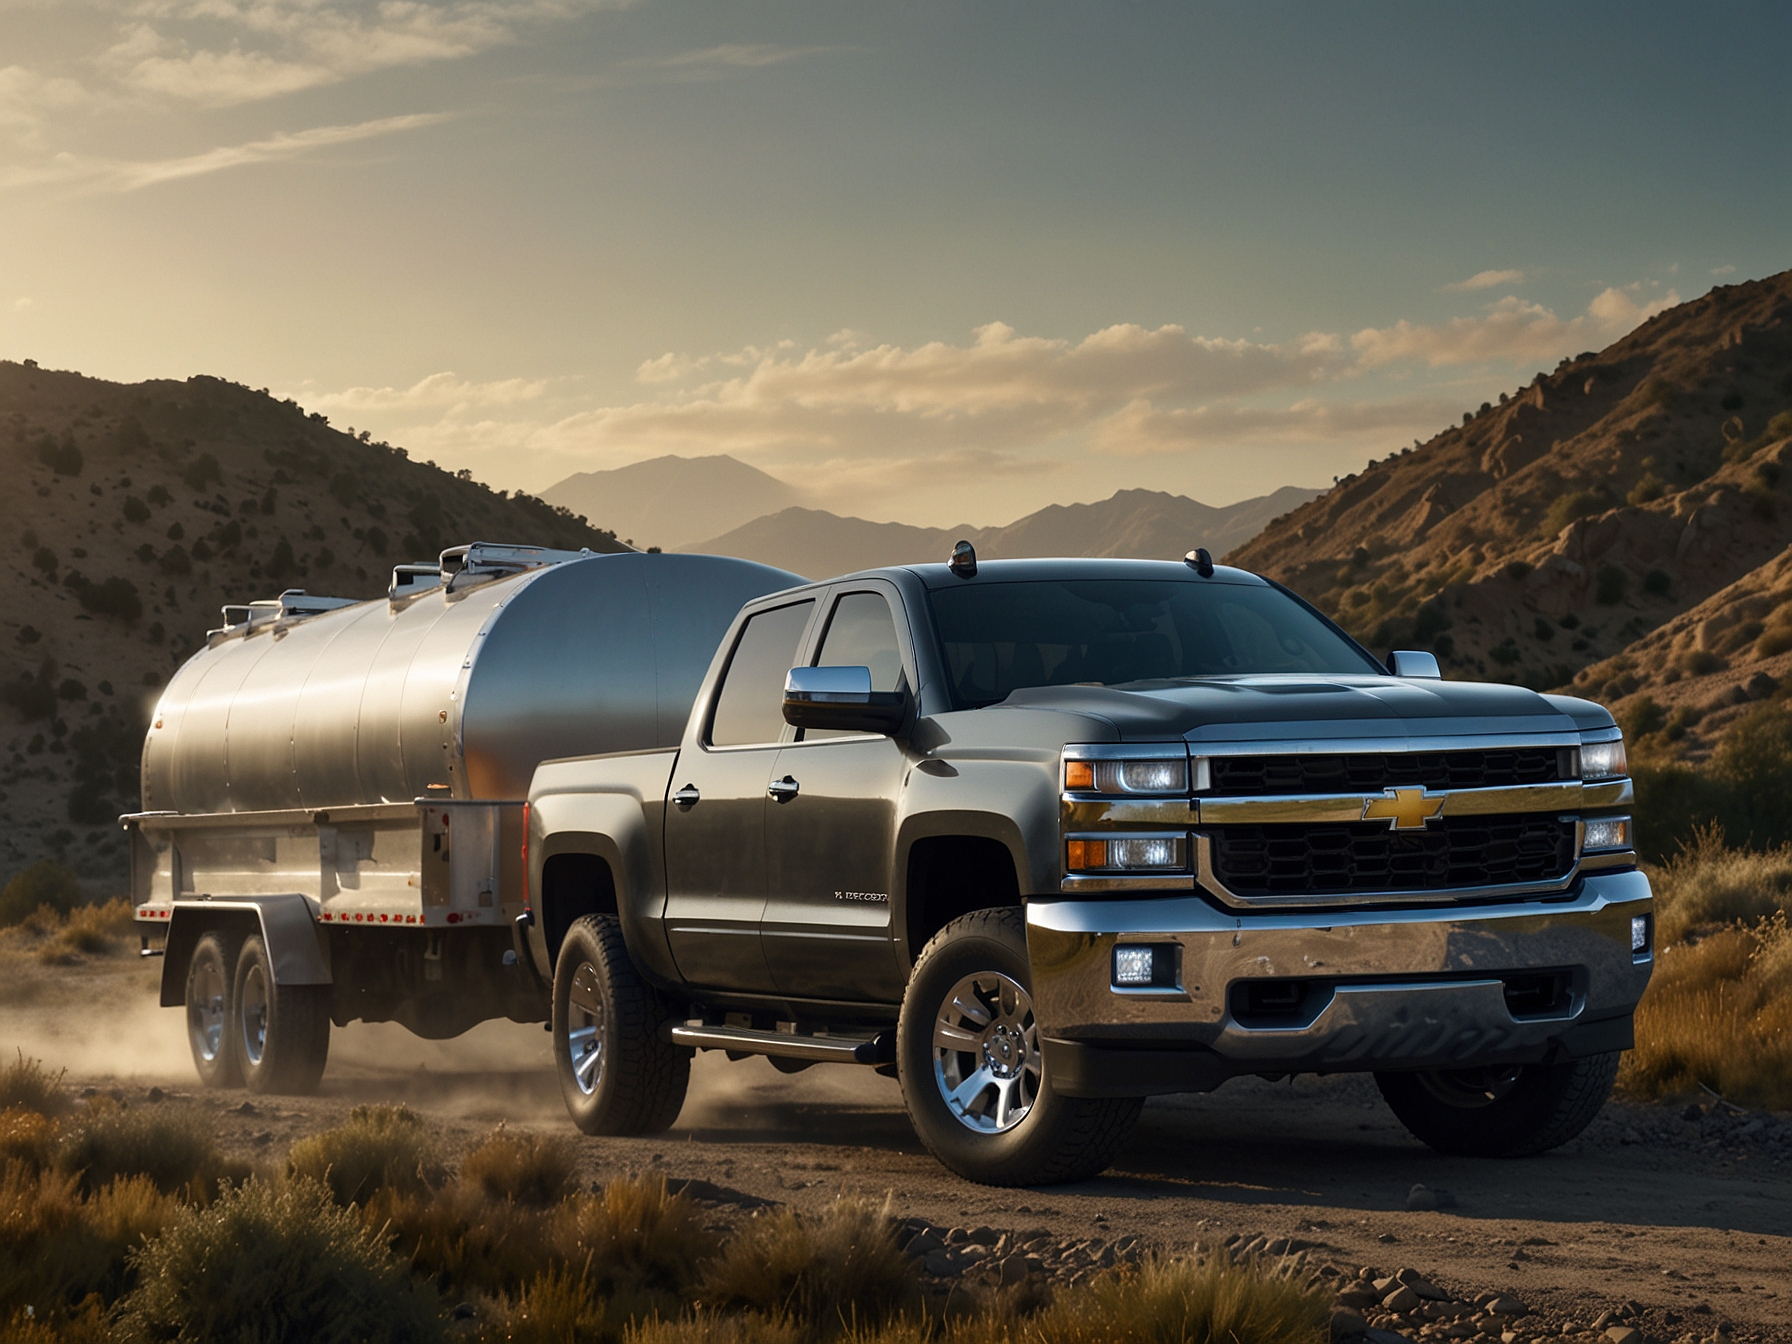 A powerful Chevrolet Silverado 1500 hauling a heavy-duty trailer up a steep incline, emphasizing its 6.2-liter V8 engine and advanced towing technologies like Transparent Trailer View.